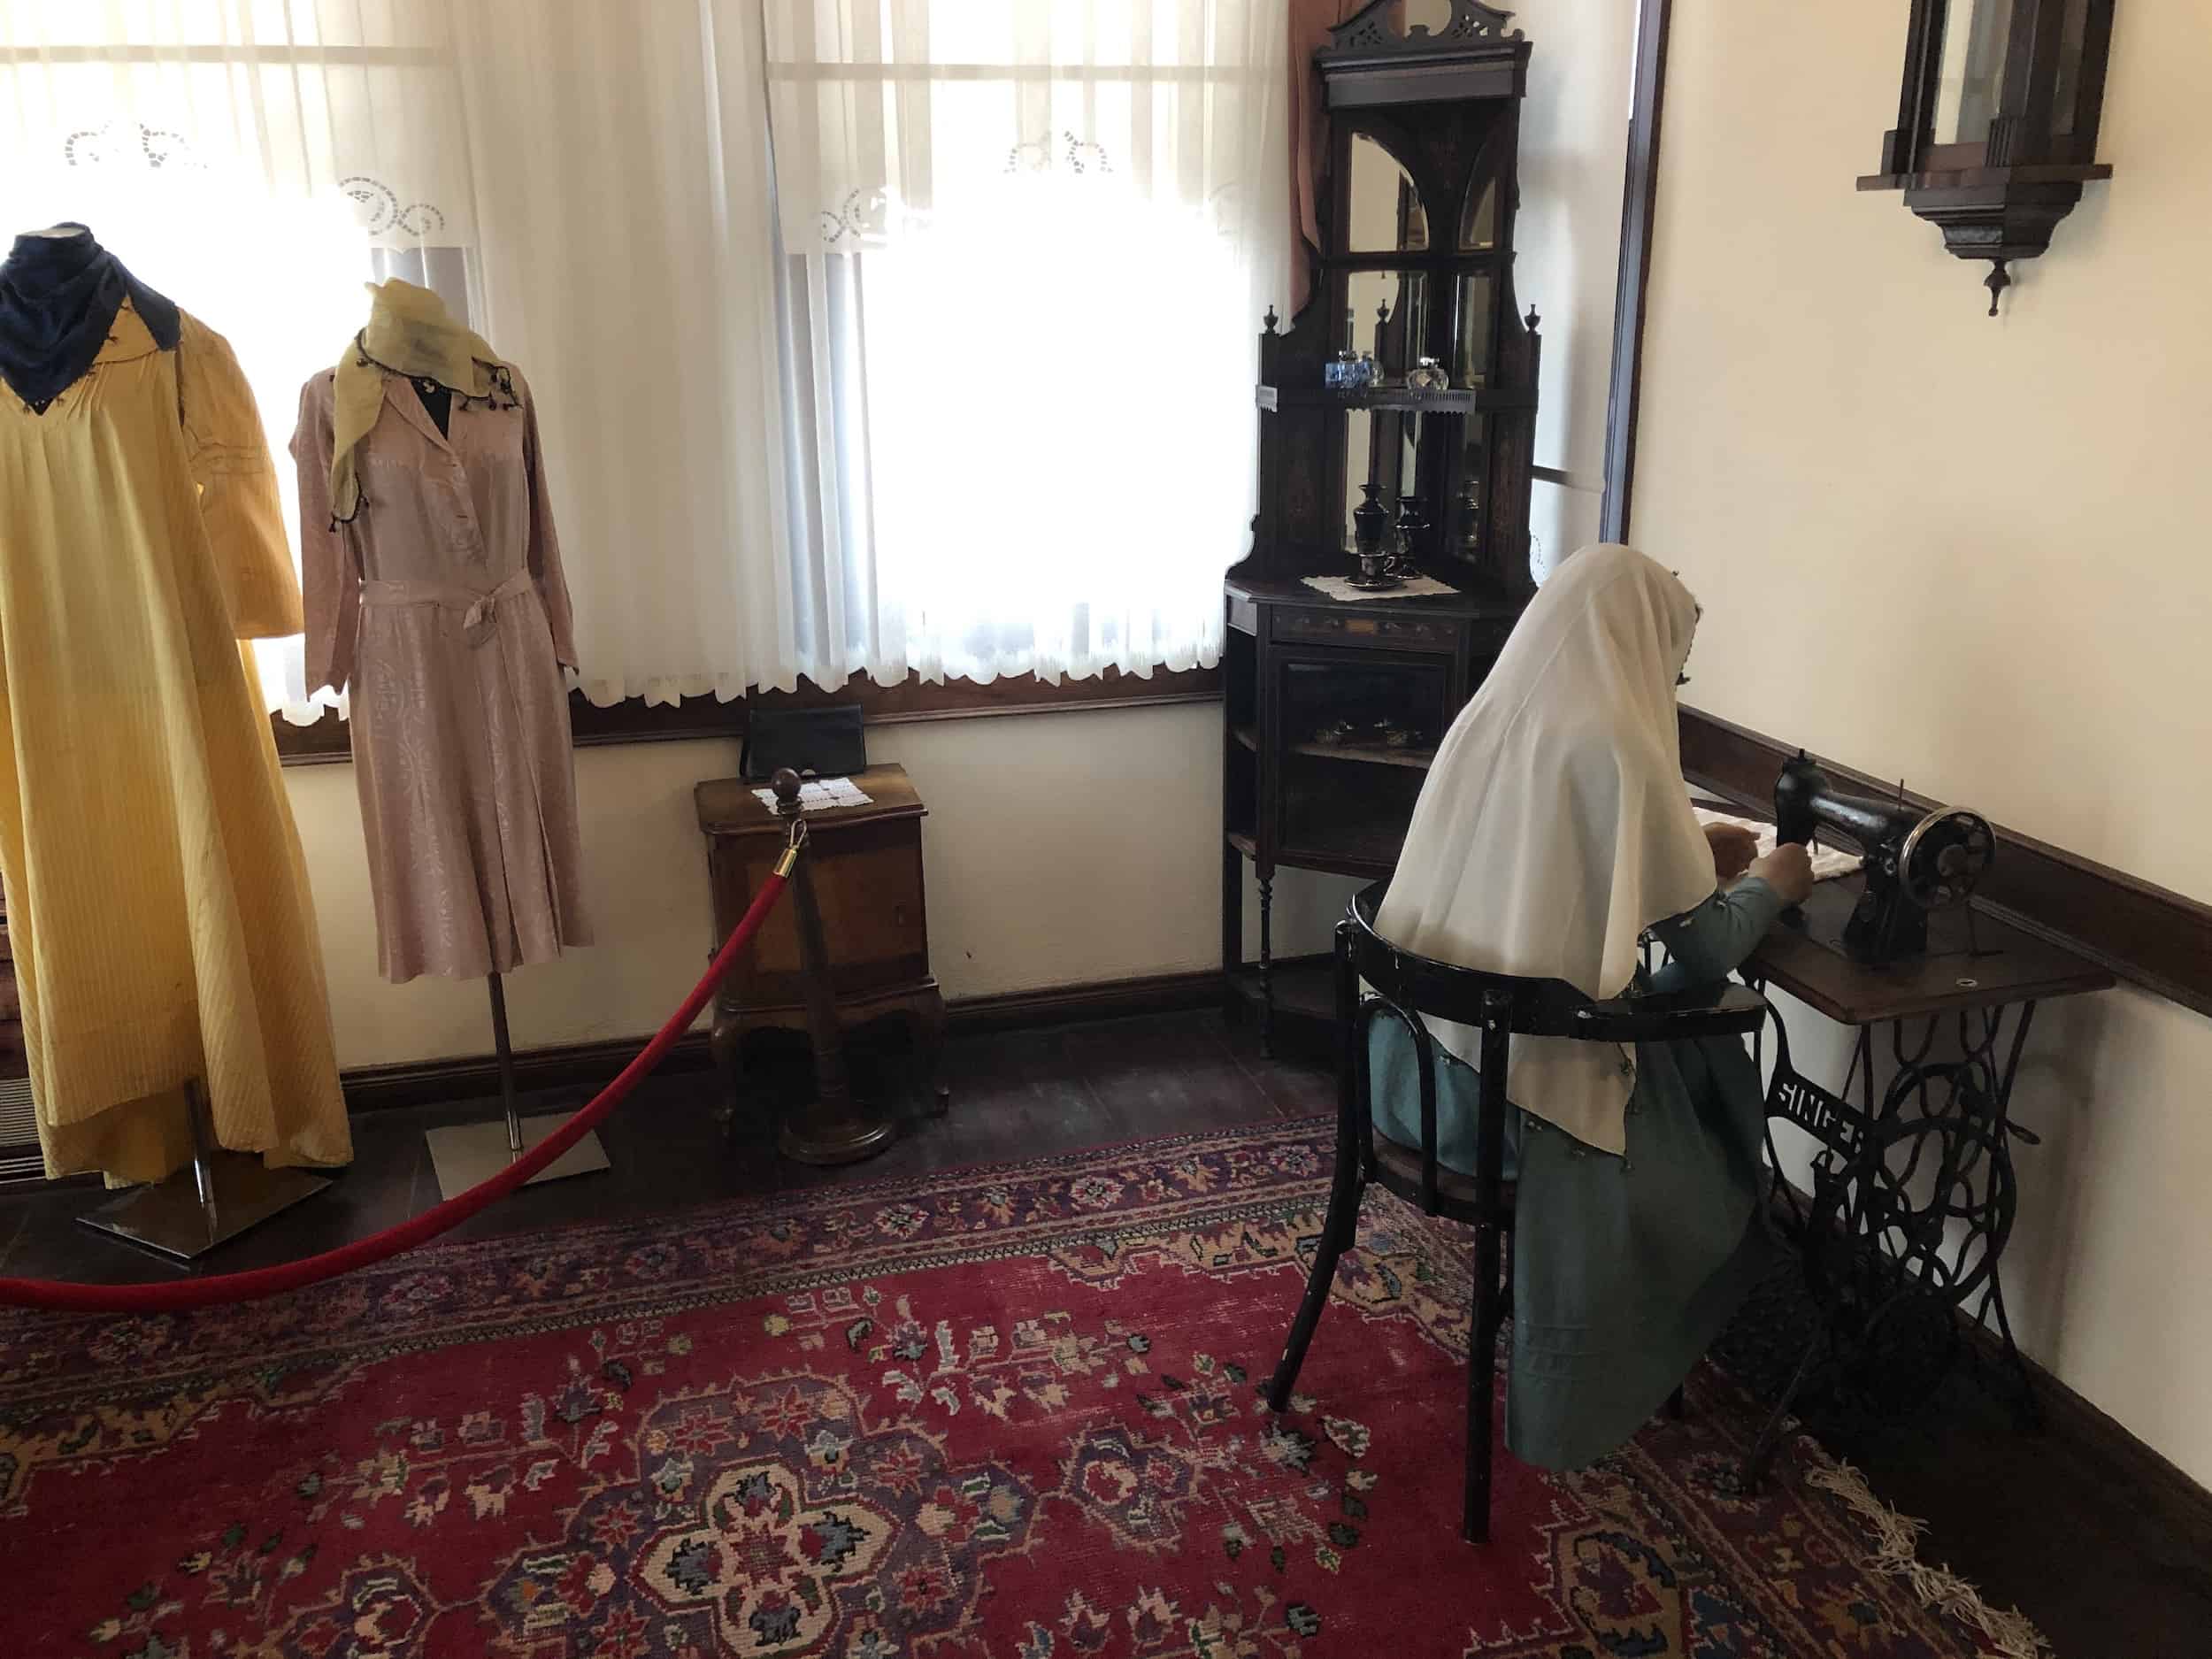 Sewing at the Bursa Life Culture Museum